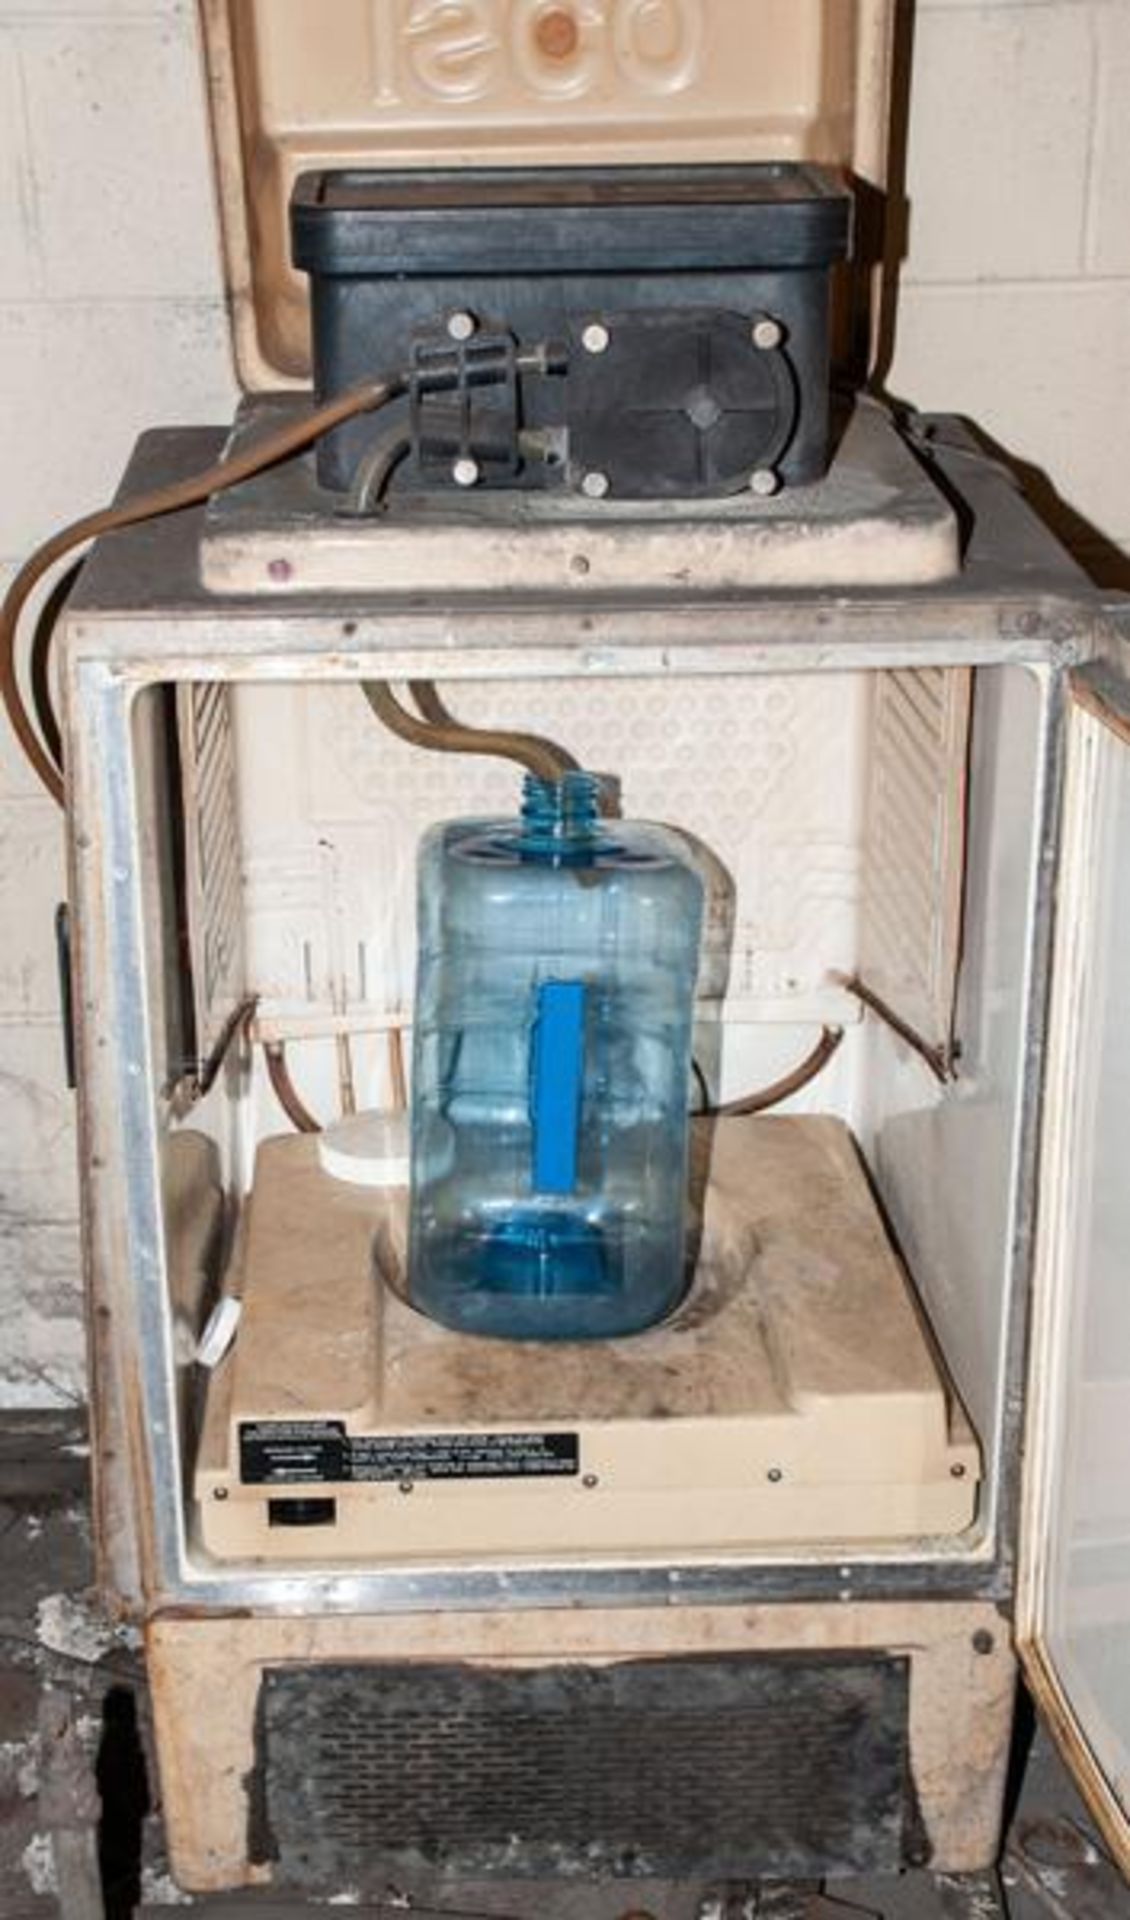 Isco 3710 automatic water sampler - Image 4 of 6